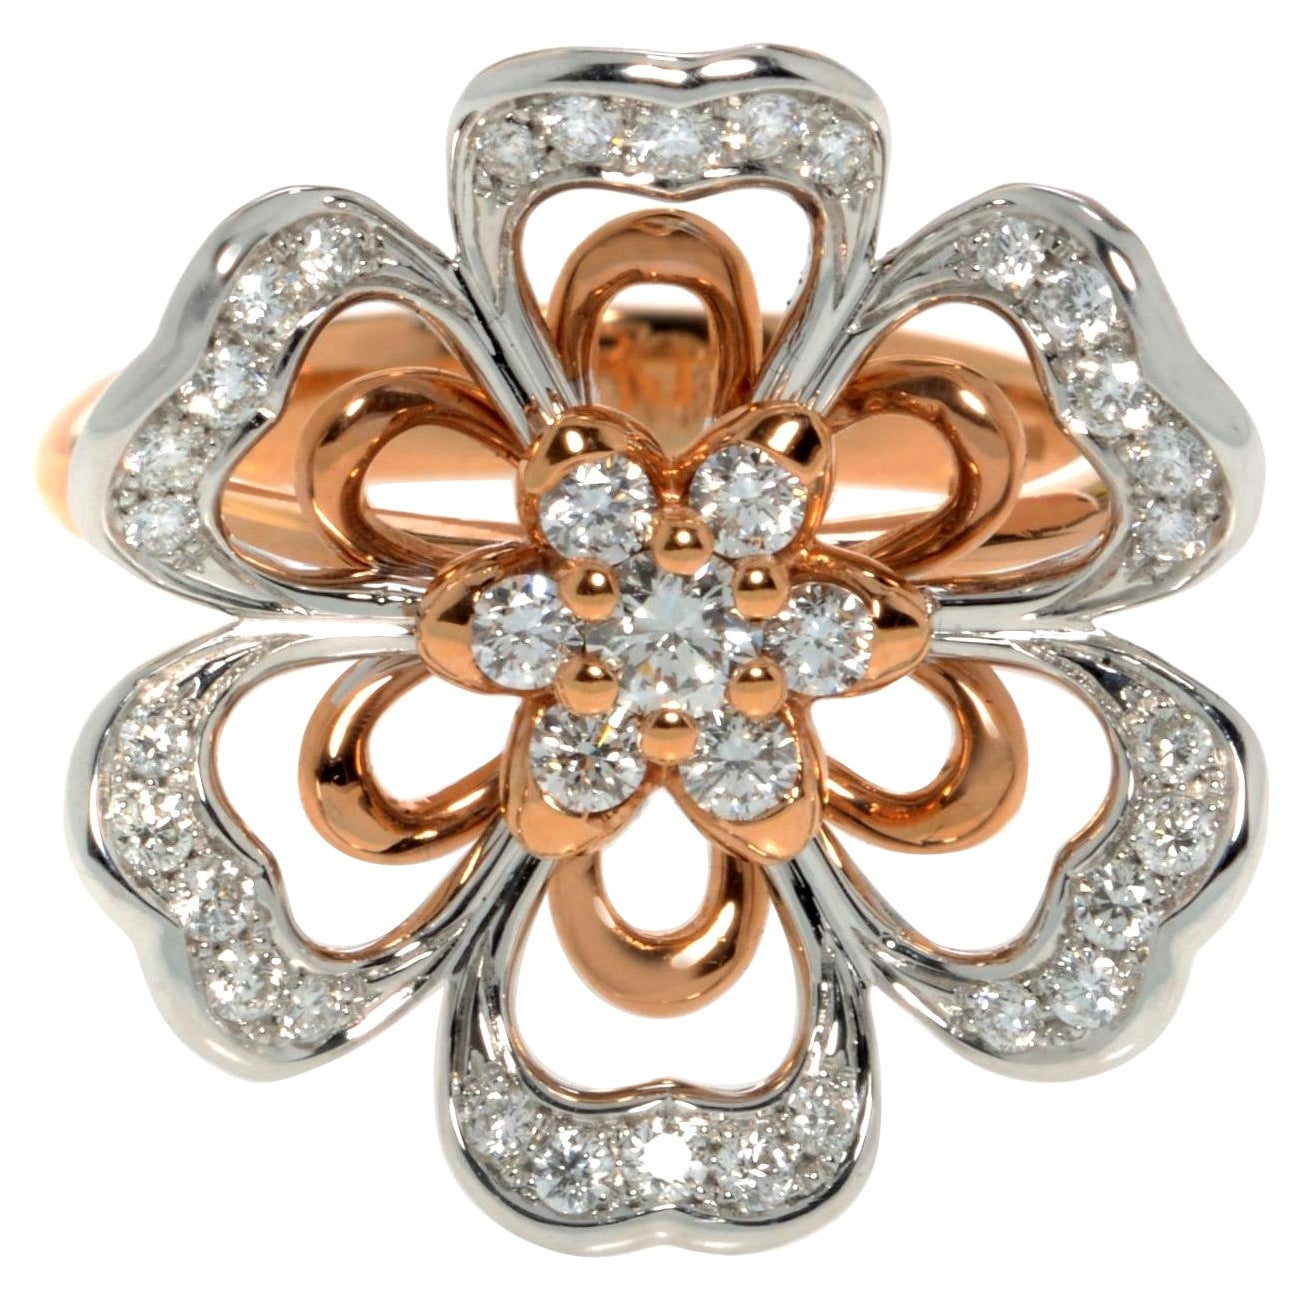 Luca Carati Diamond Cocktail Ring 18K White & Rose Gold 0.69Cttw Size 7.5 For Sale